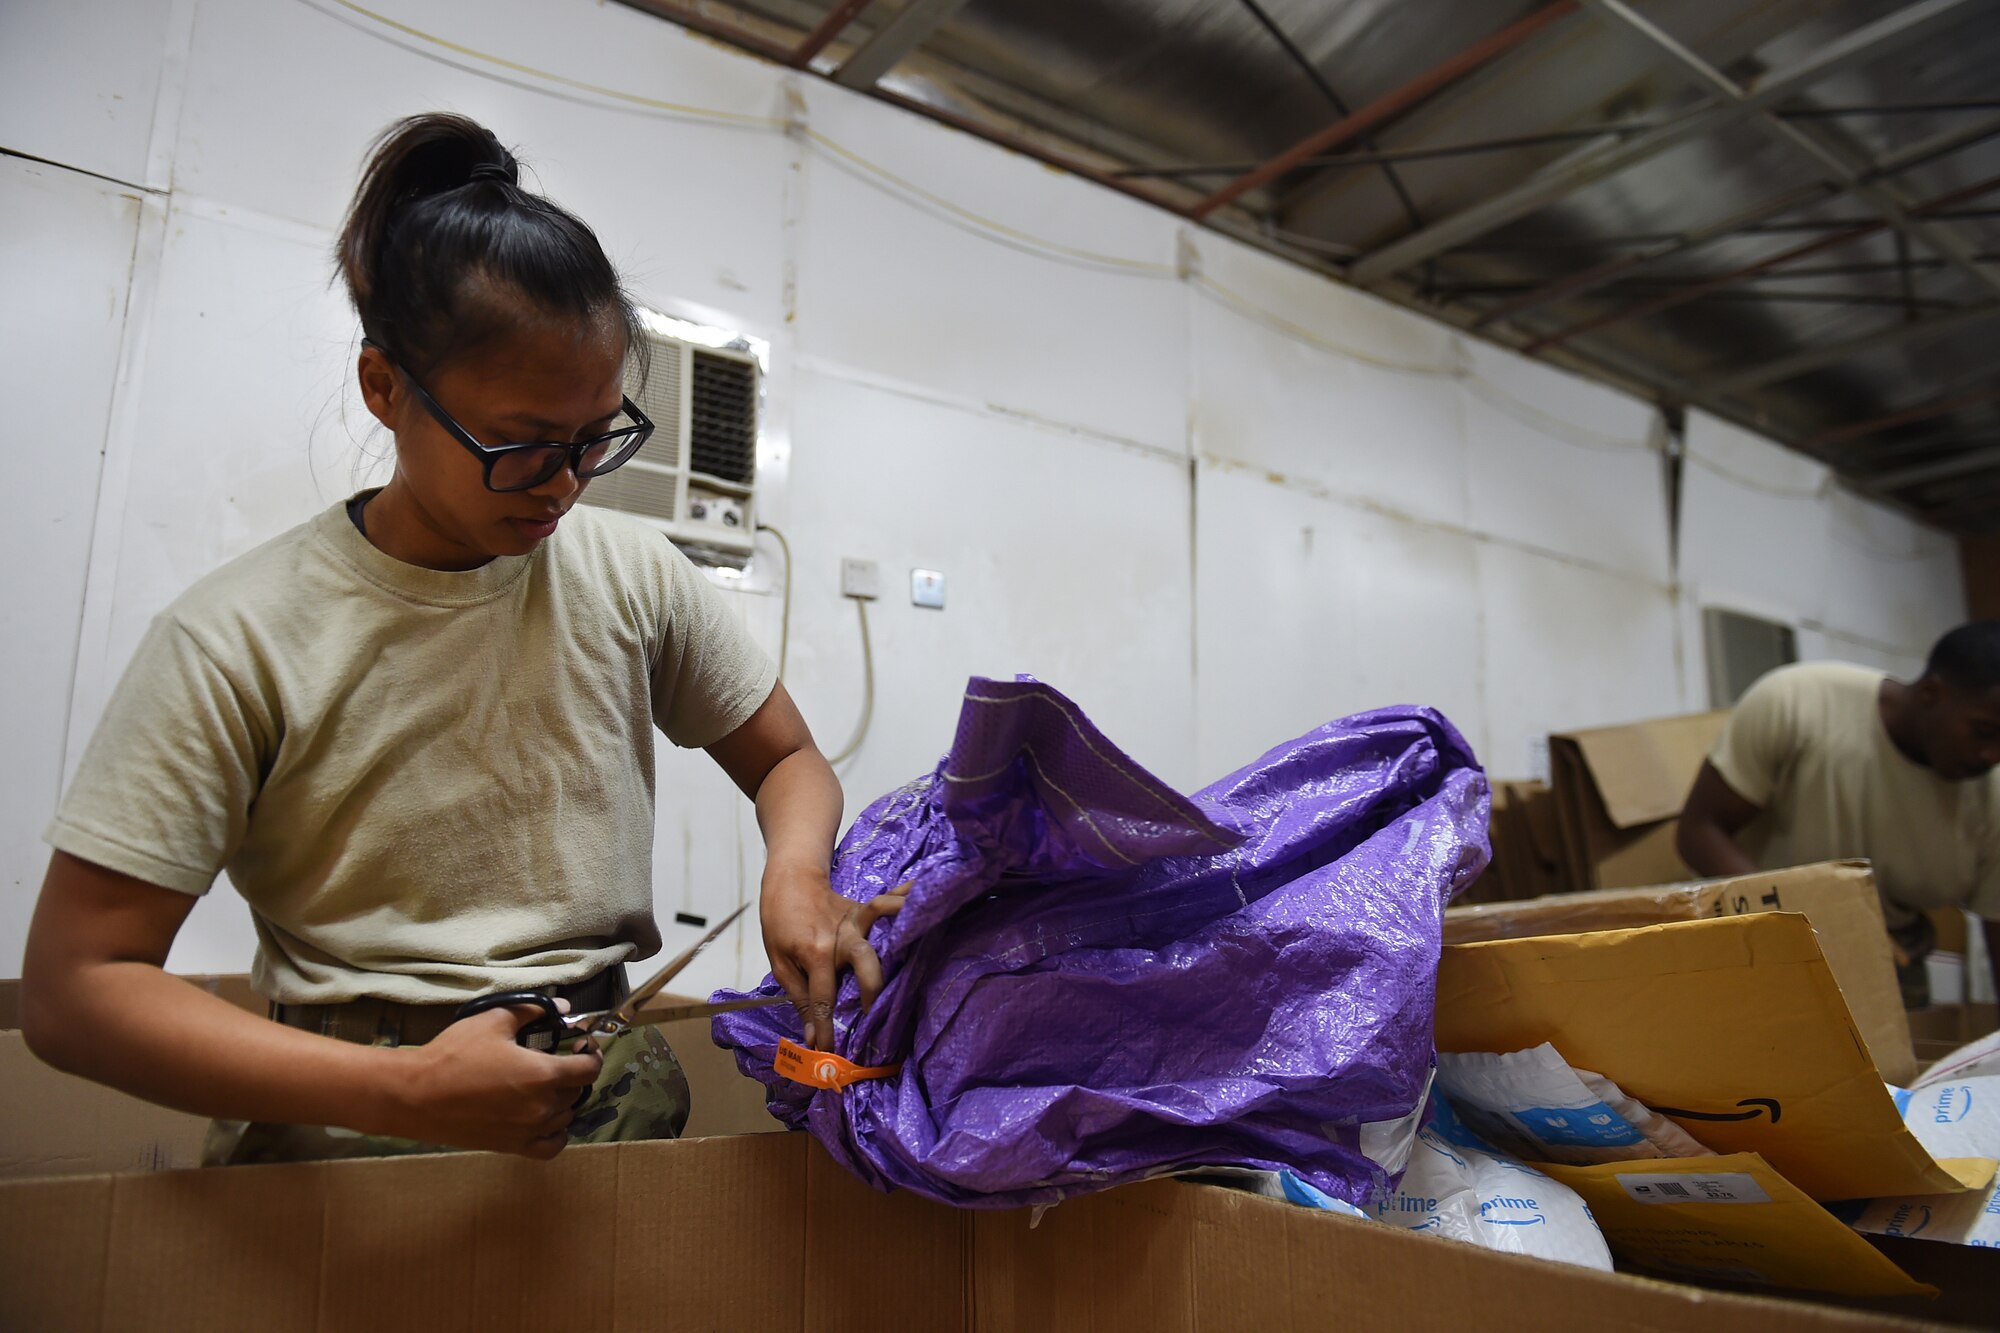 A female Airman cuts a bag of mail open with scissors